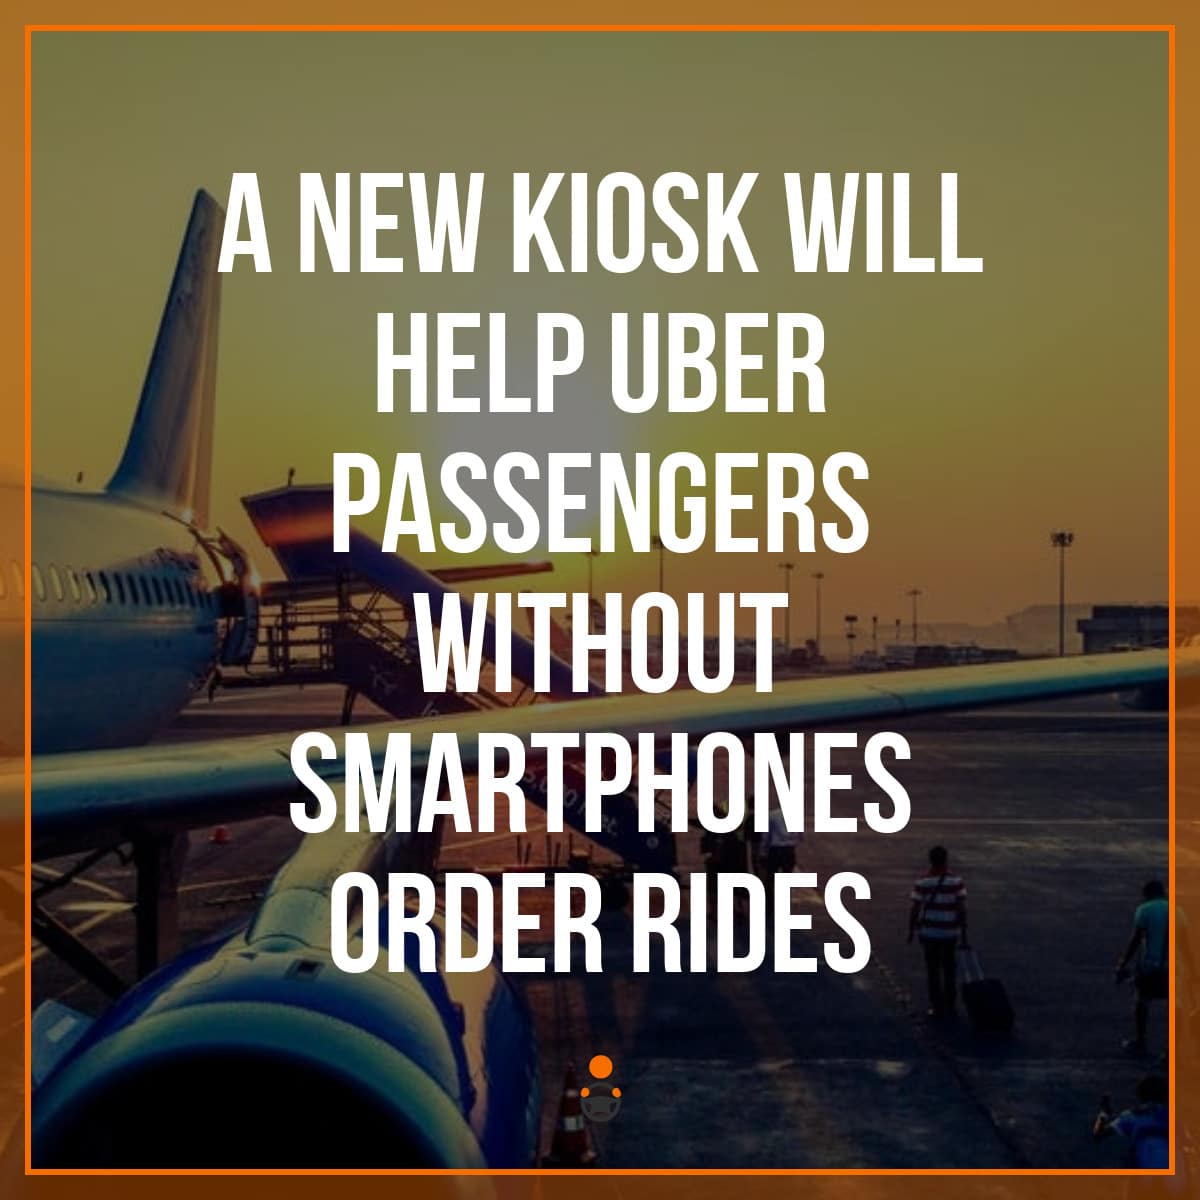 A New Kiosk Will Help Uber Passengers Without Smartphones Order Rides